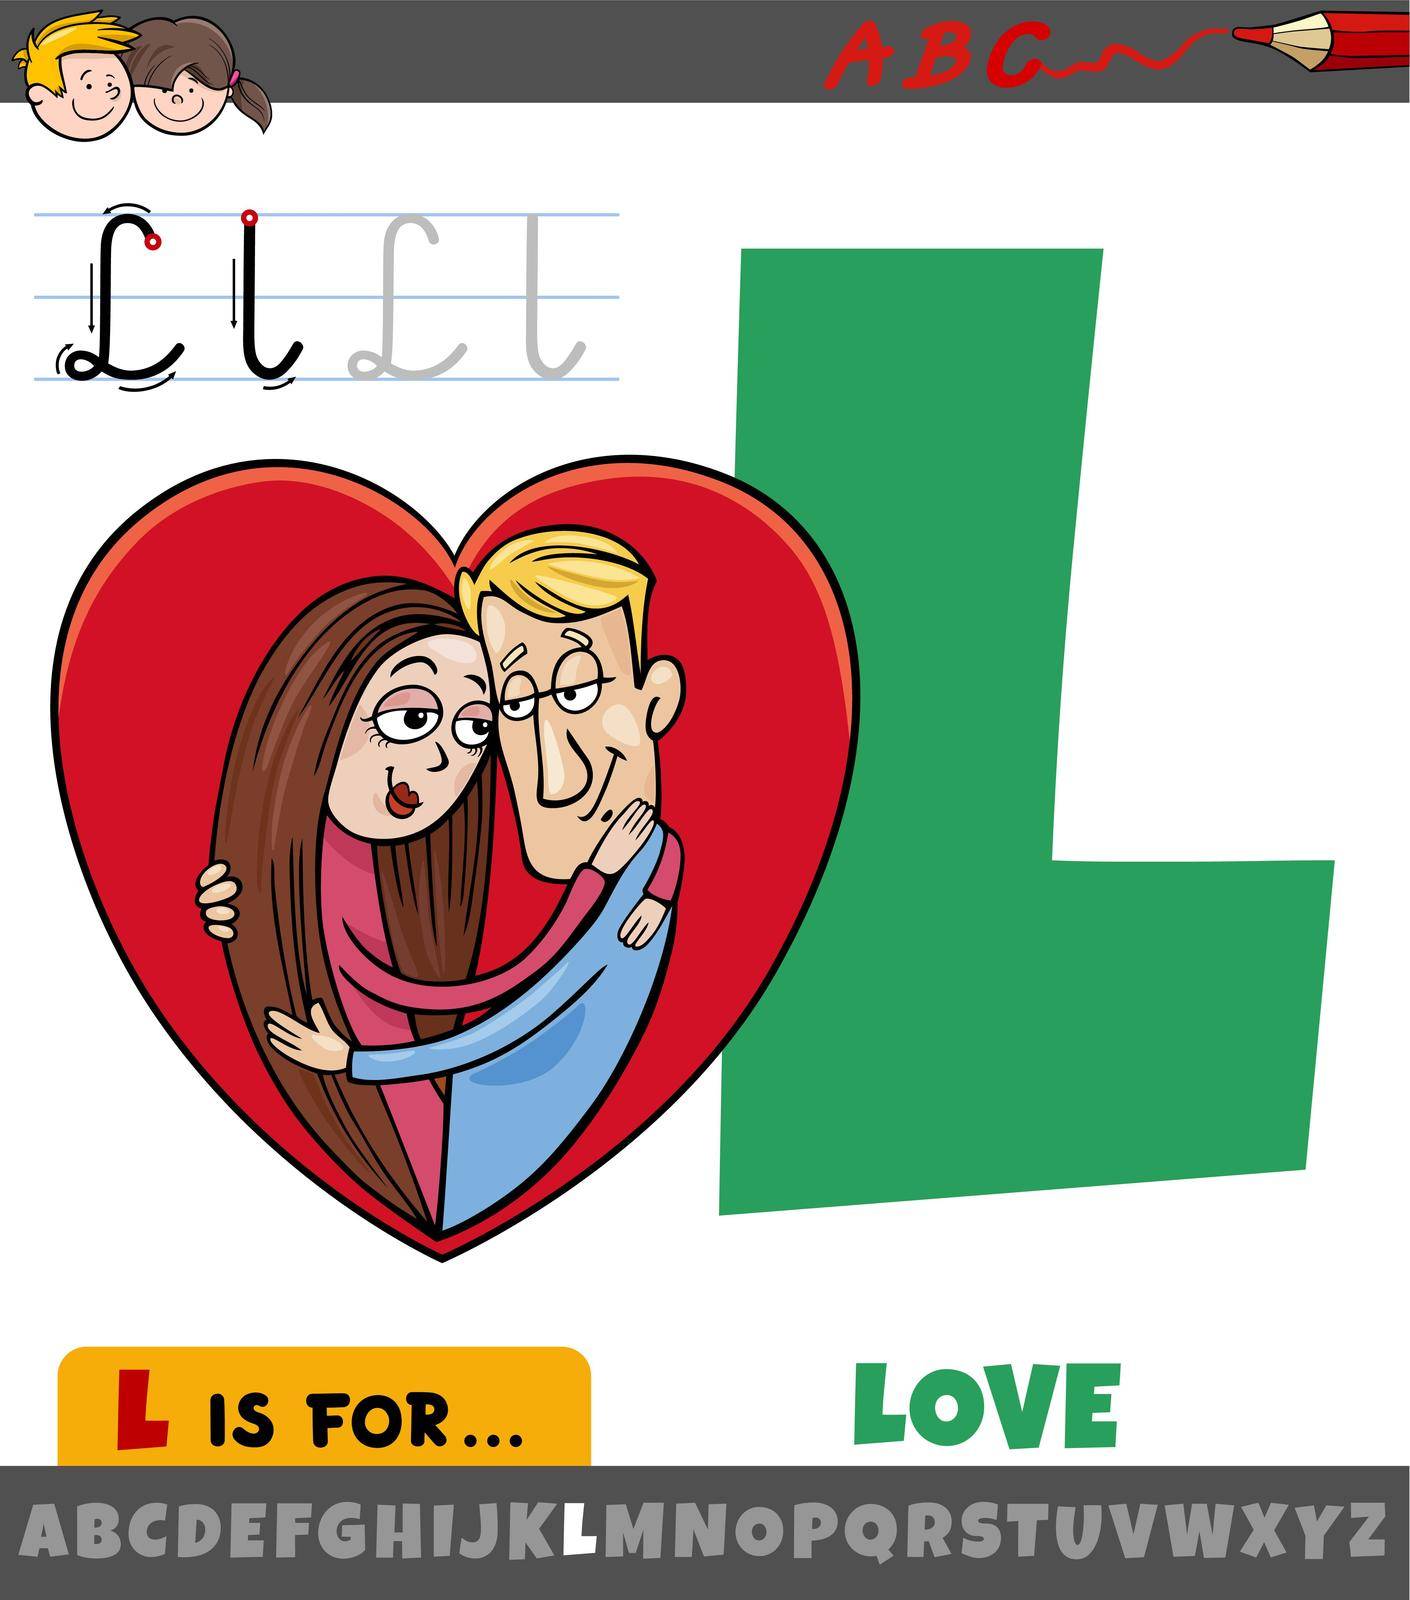 Educational cartoon illustration of letter L from alphabet with love word